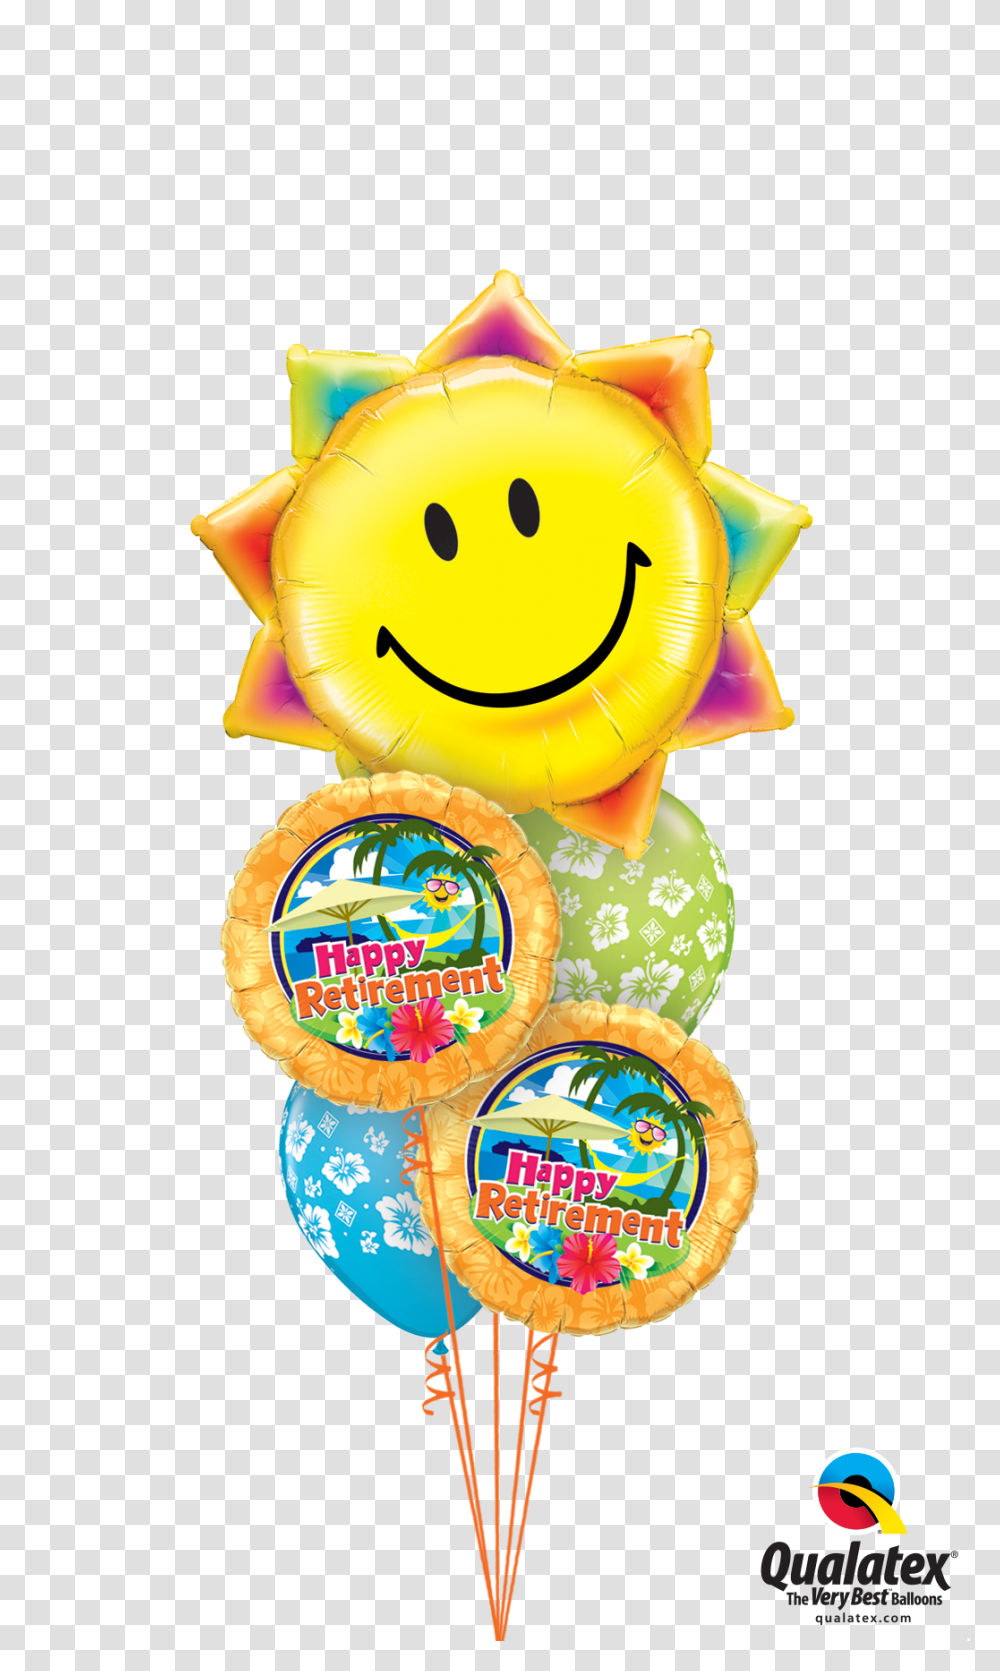 Happy Retirement Happy Birthday Balloons With Smiley, Toy, Doodle, Drawing Transparent Png